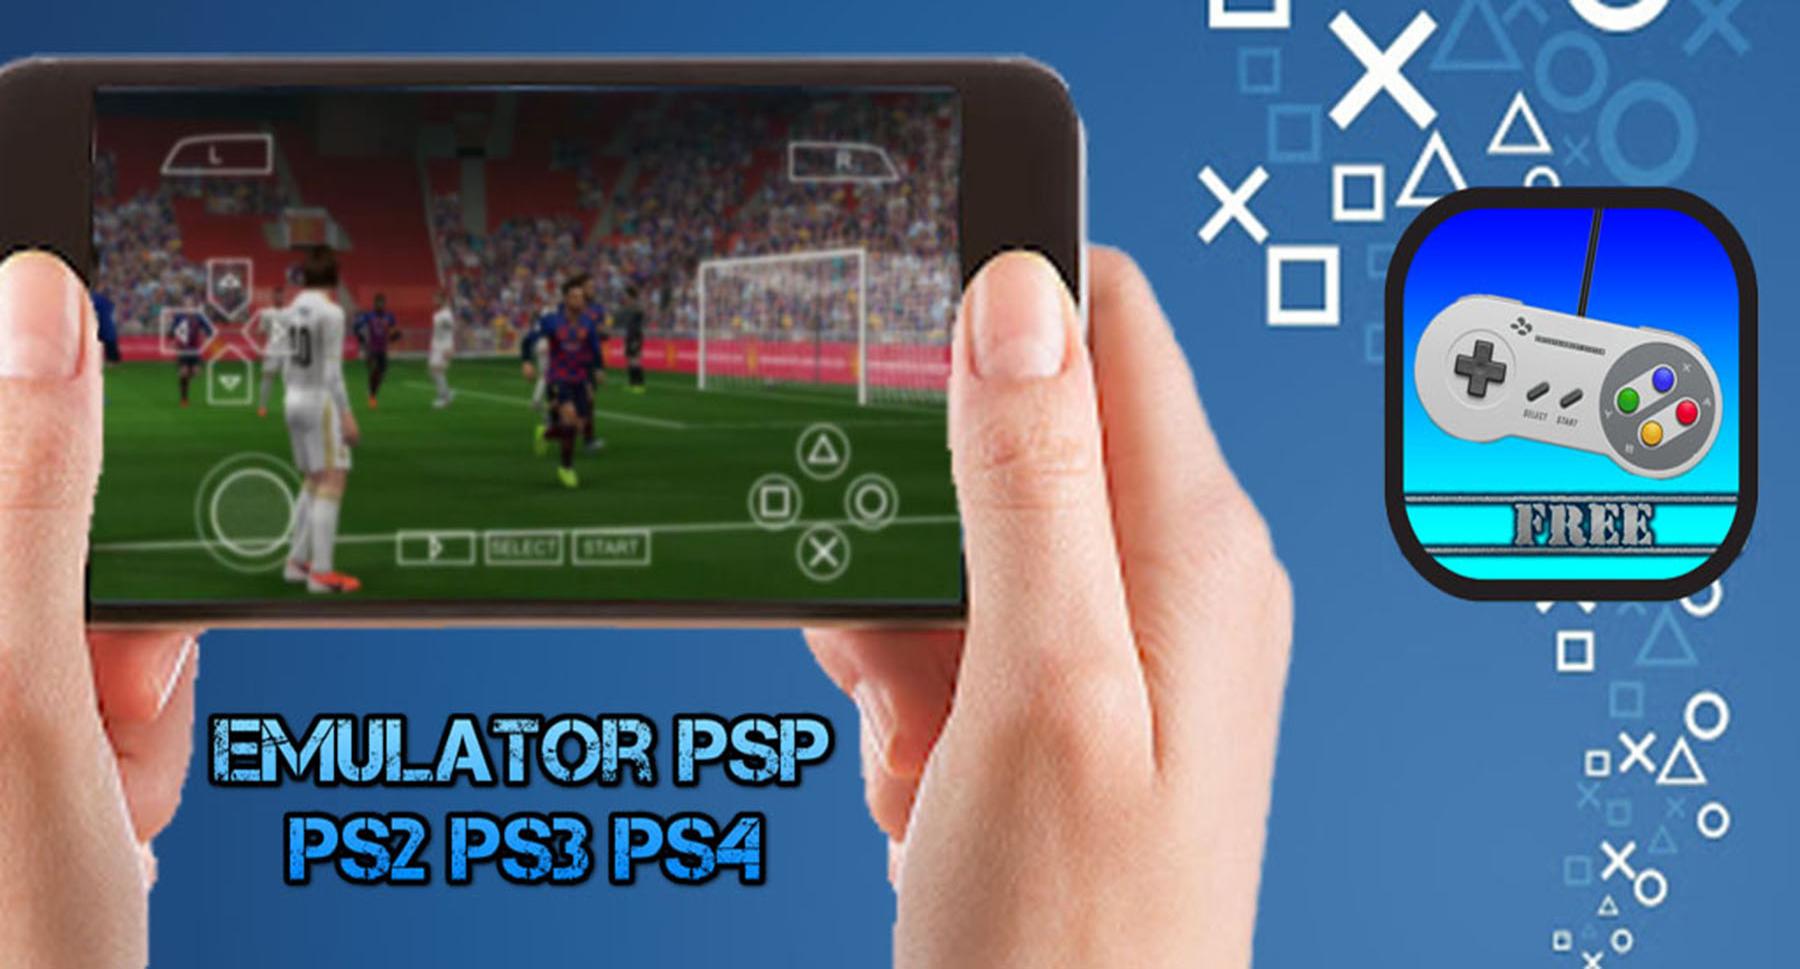 DOWNLOAD PLAY Emulator PSP PS2 PS4 Free APK for Download